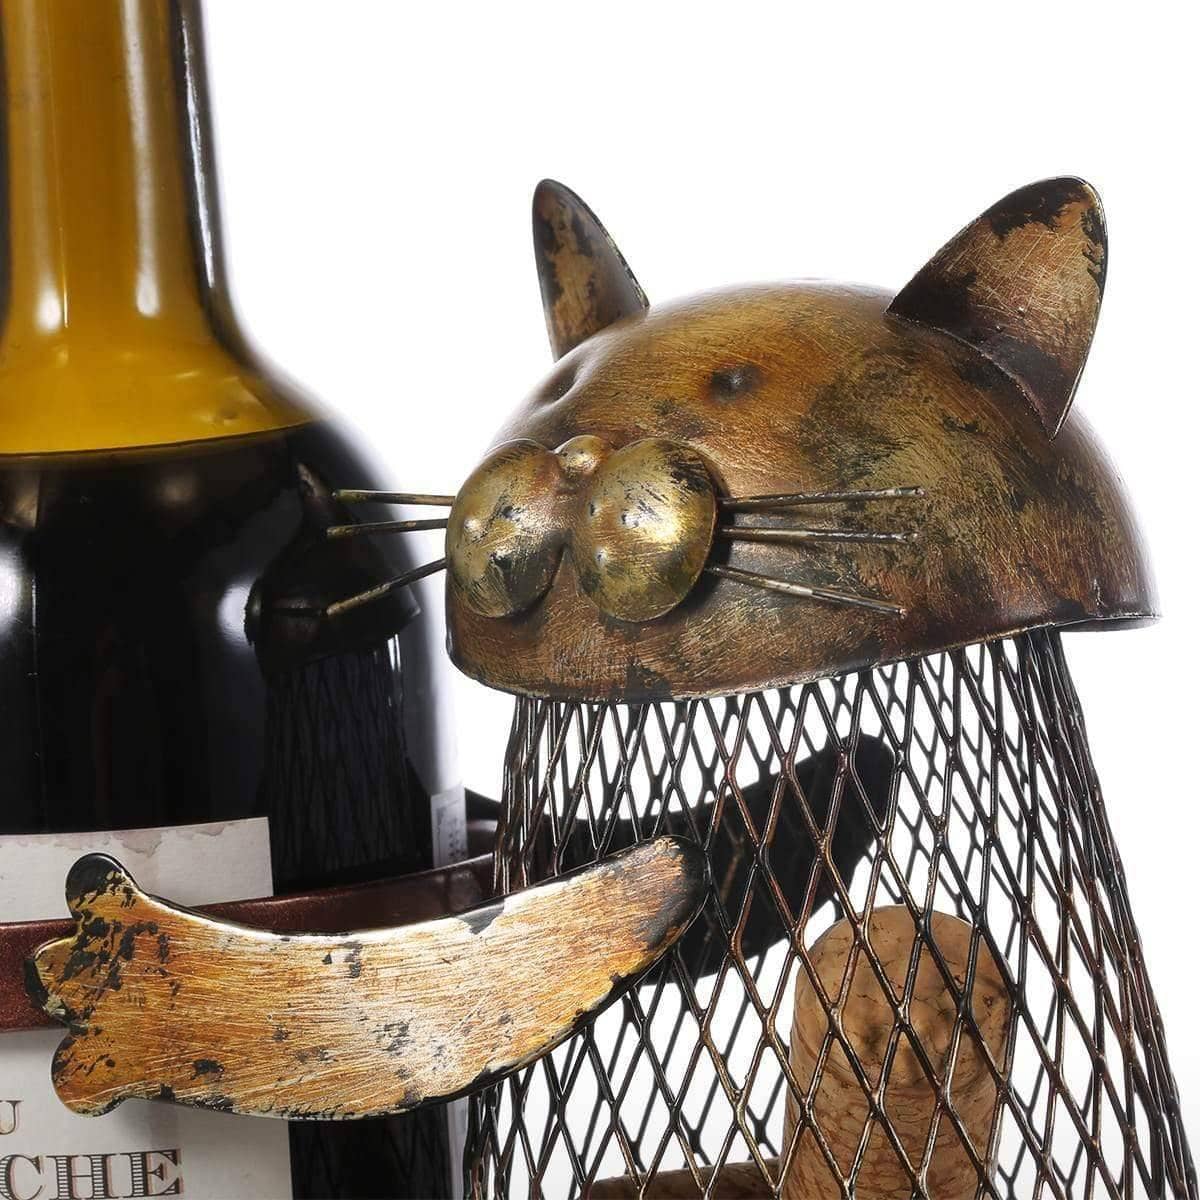 Purr-fect Wine Storage - Cat Wine Bottle and Cork HolderRack - Whimsical and Personalized Wine Accessory